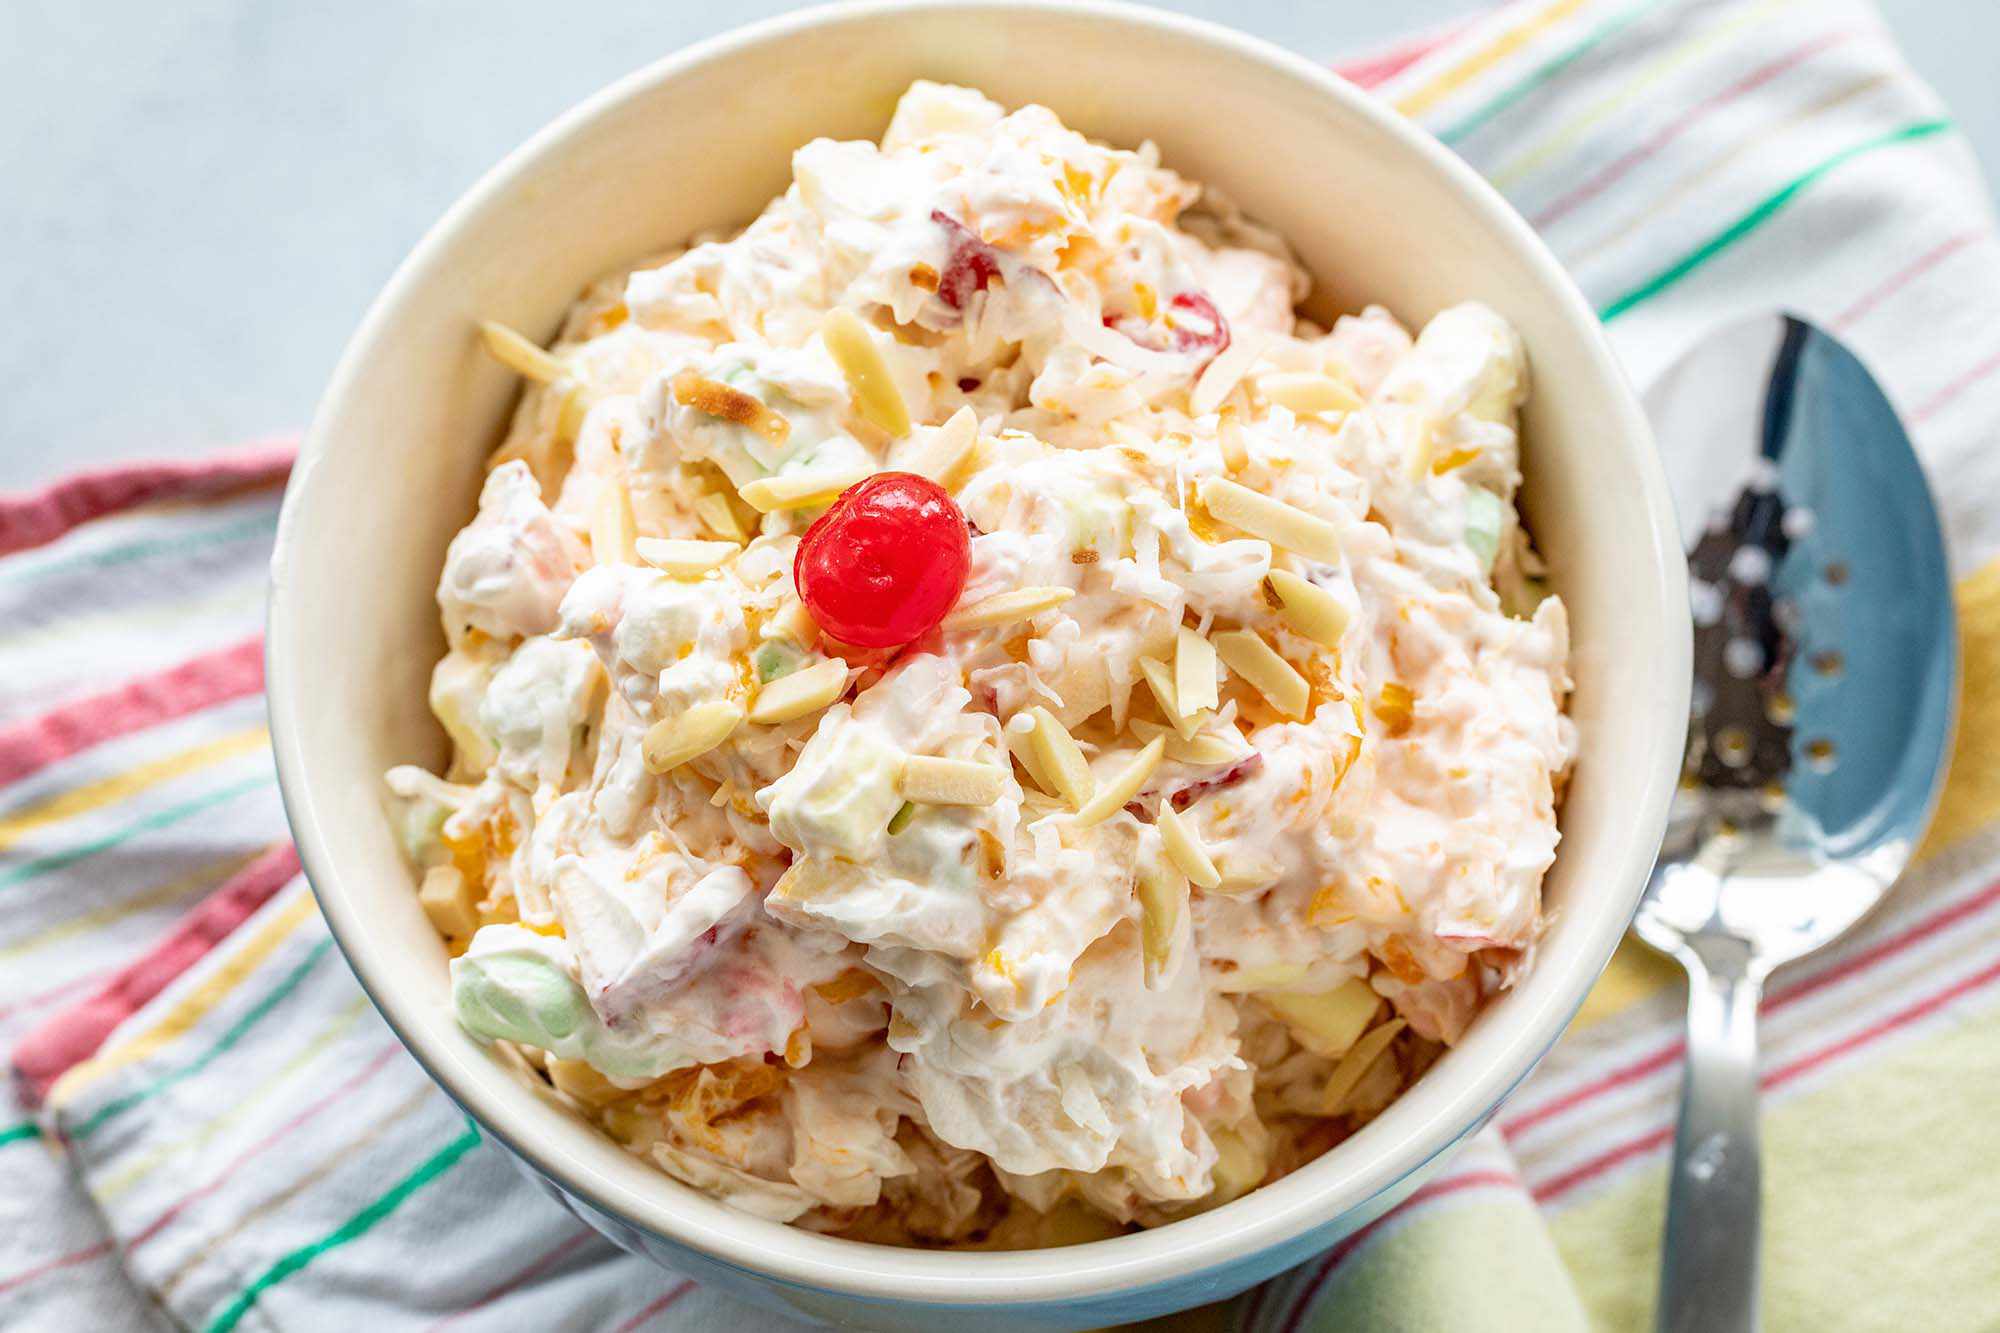 Trust Me, I Can Tell Which Generation You’re from Based on the Retro Food You Like Ambrosia salad